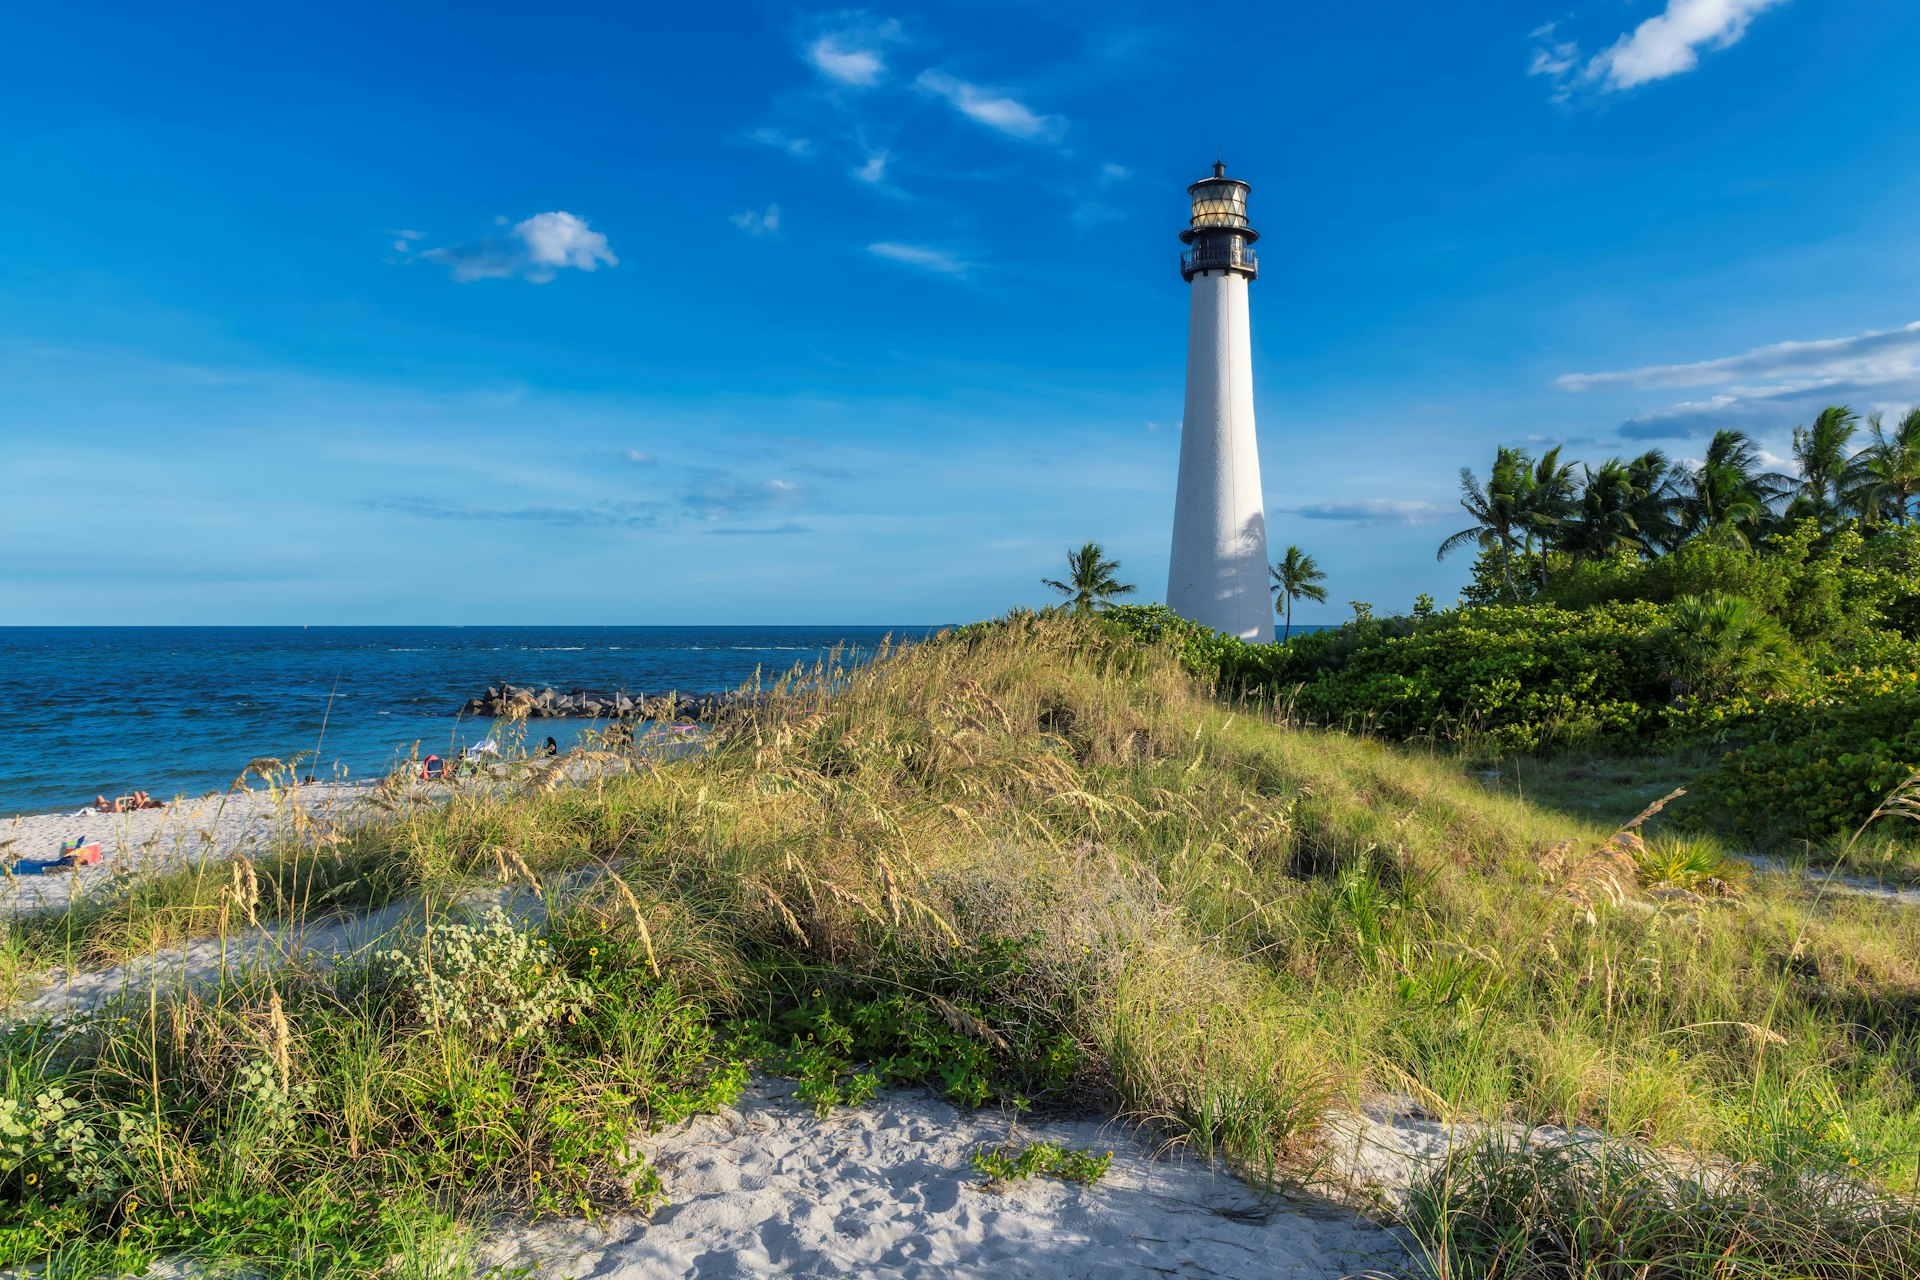 Cape Florida Lighthouse on the beach at Key Biscayne